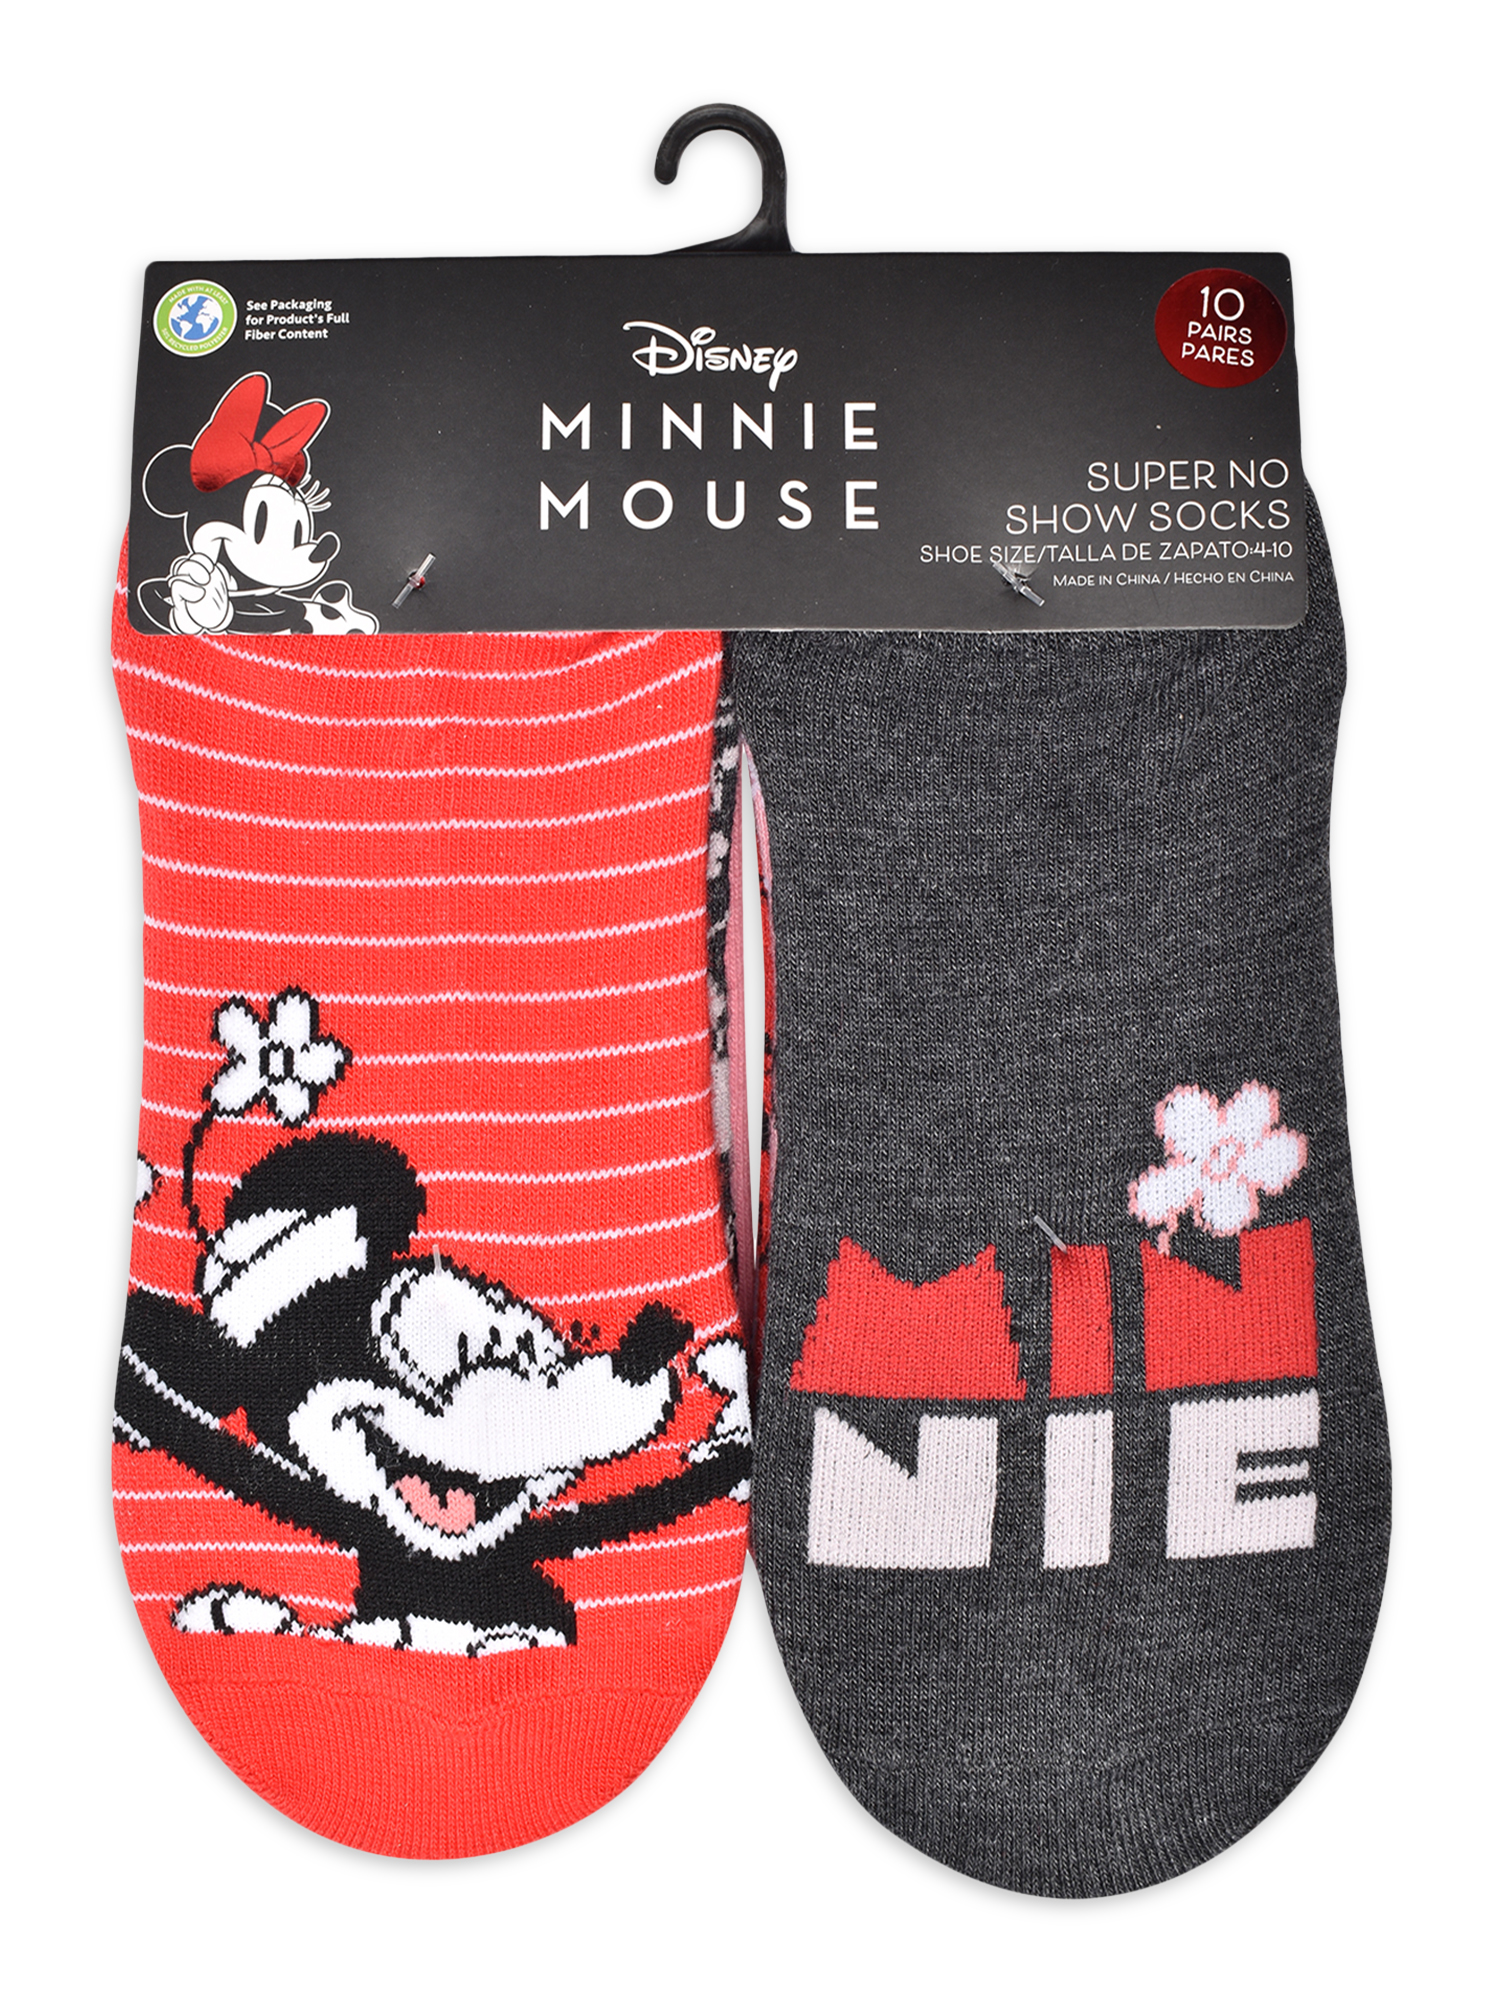 Disney Minnie Mouse Womens Graphic Super No Show Socks, 10-Pack, Sizes 4-10 - image 2 of 5